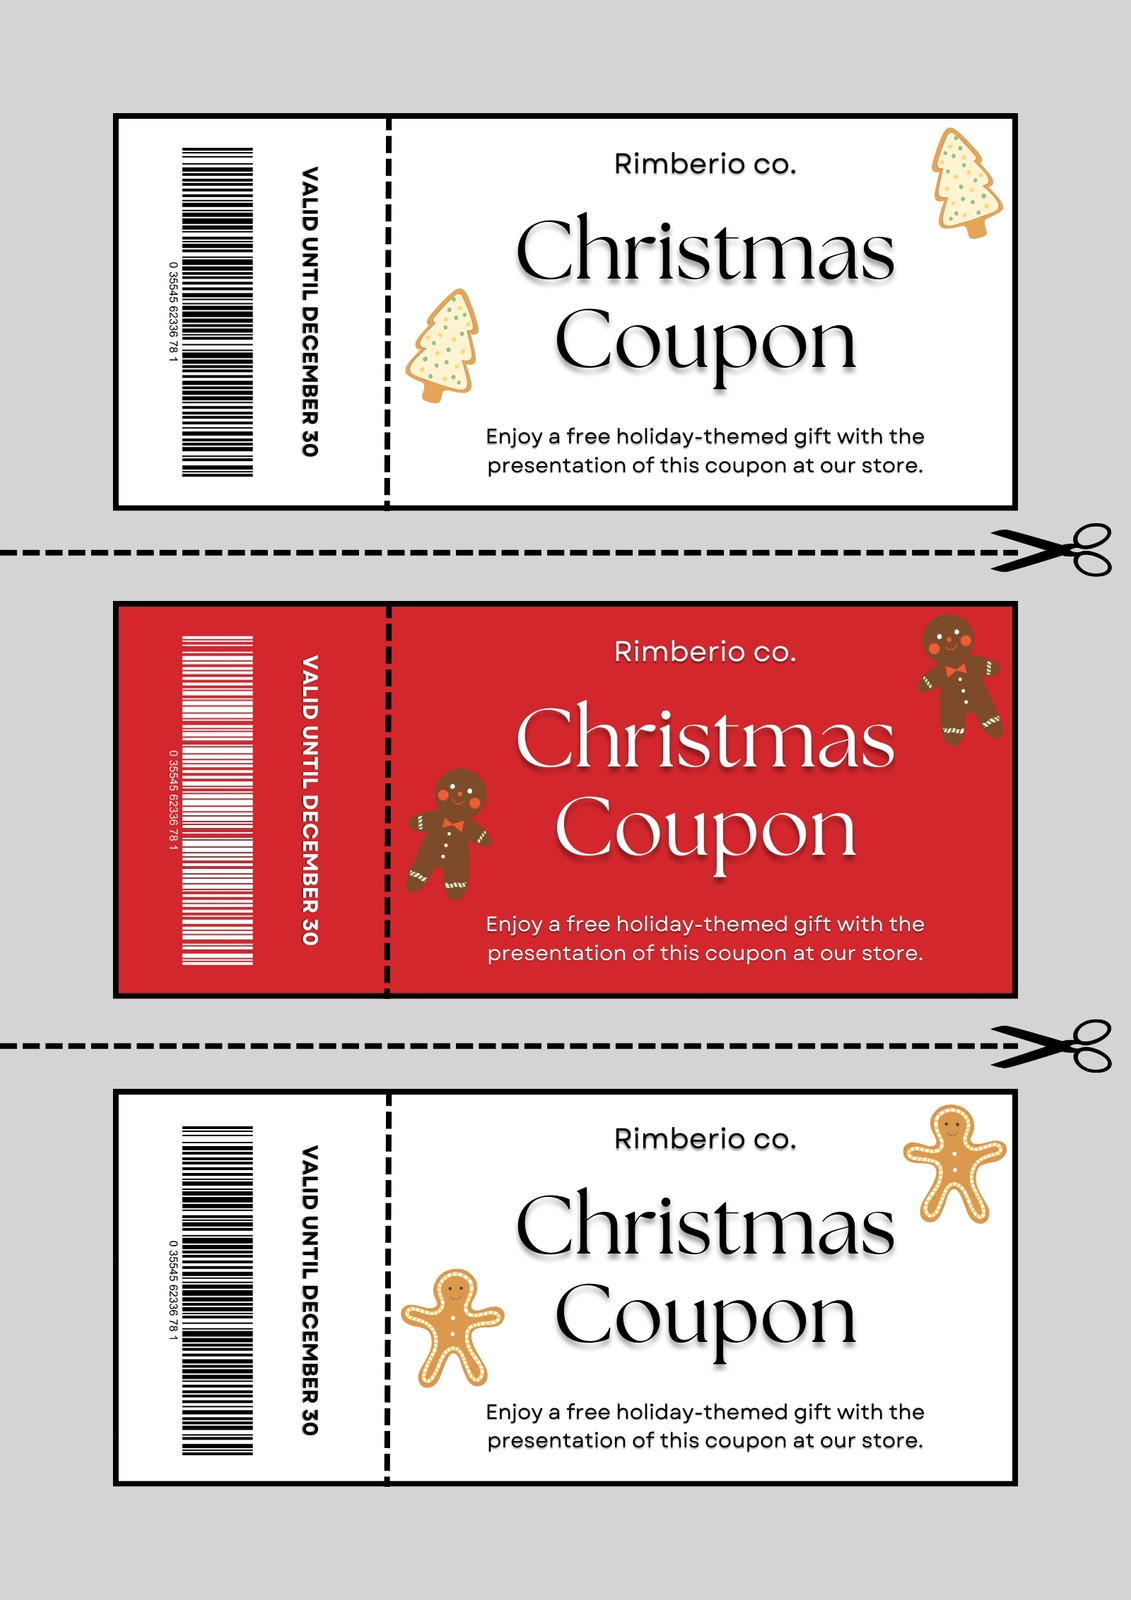 Free Online Coupon Maker: Design a Custom Coupon in Canva